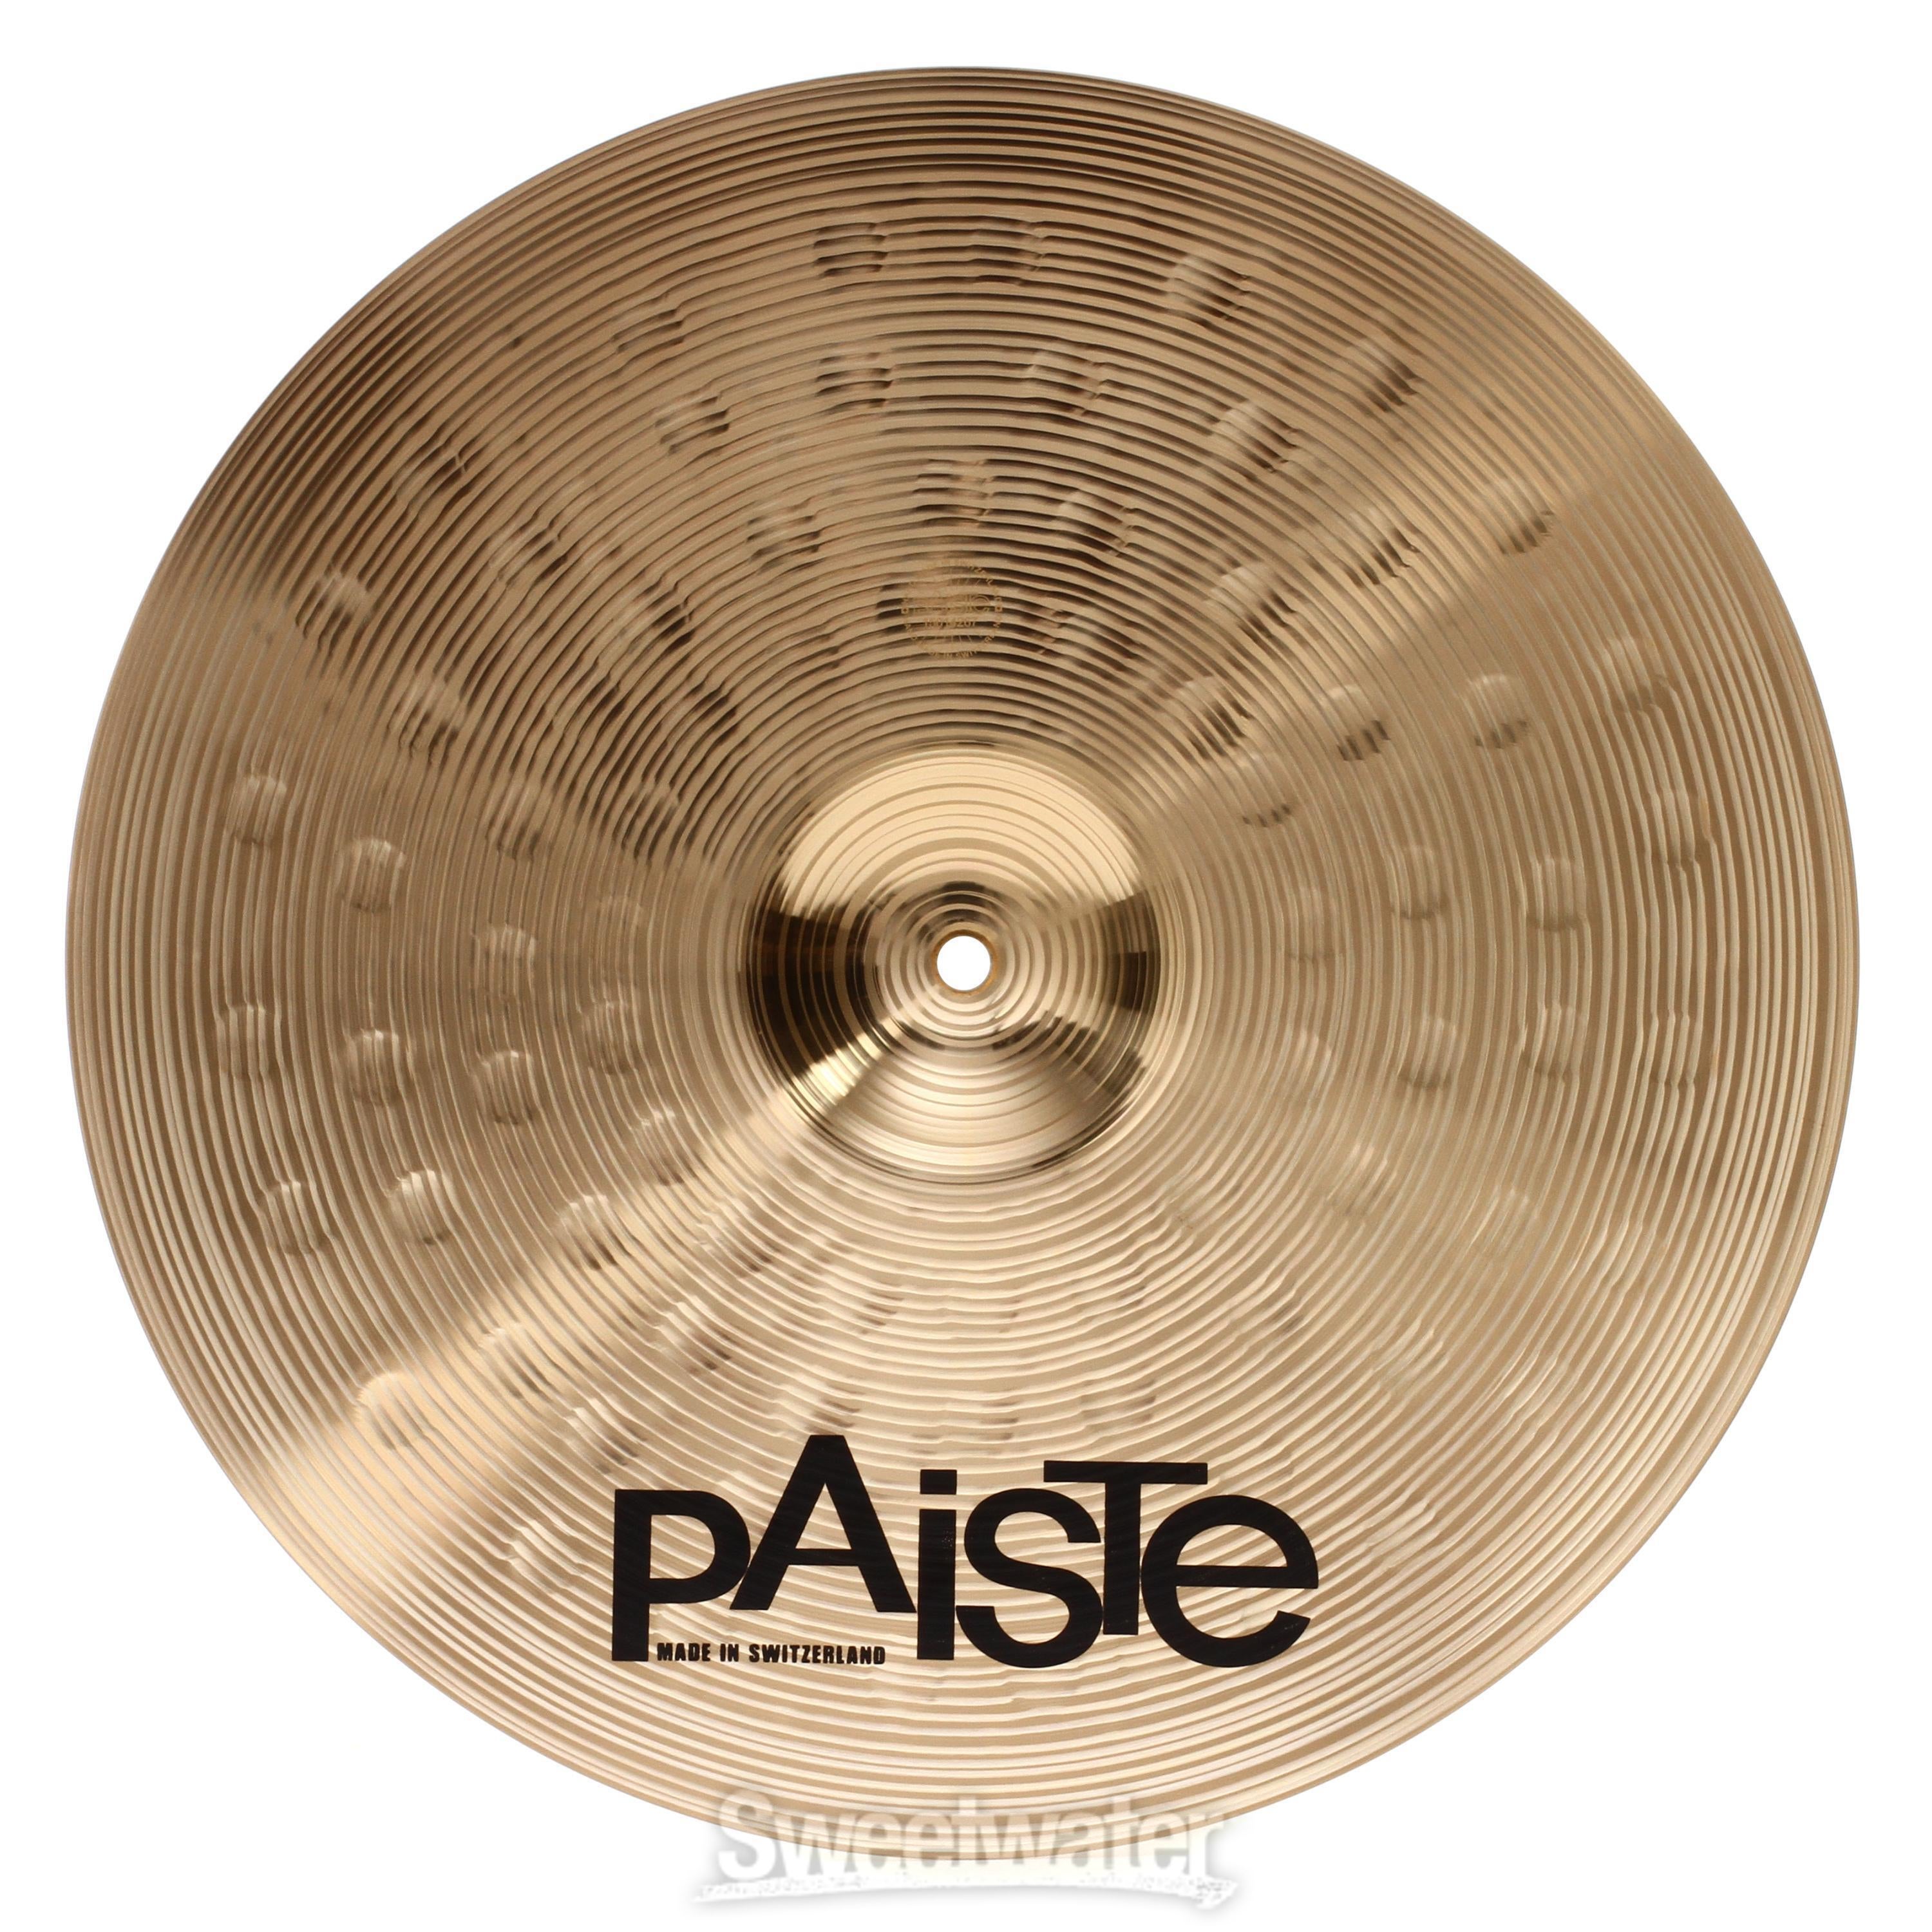 Paiste 16 inch Signature Precision Thin Crash Cymbal | Sweetwater